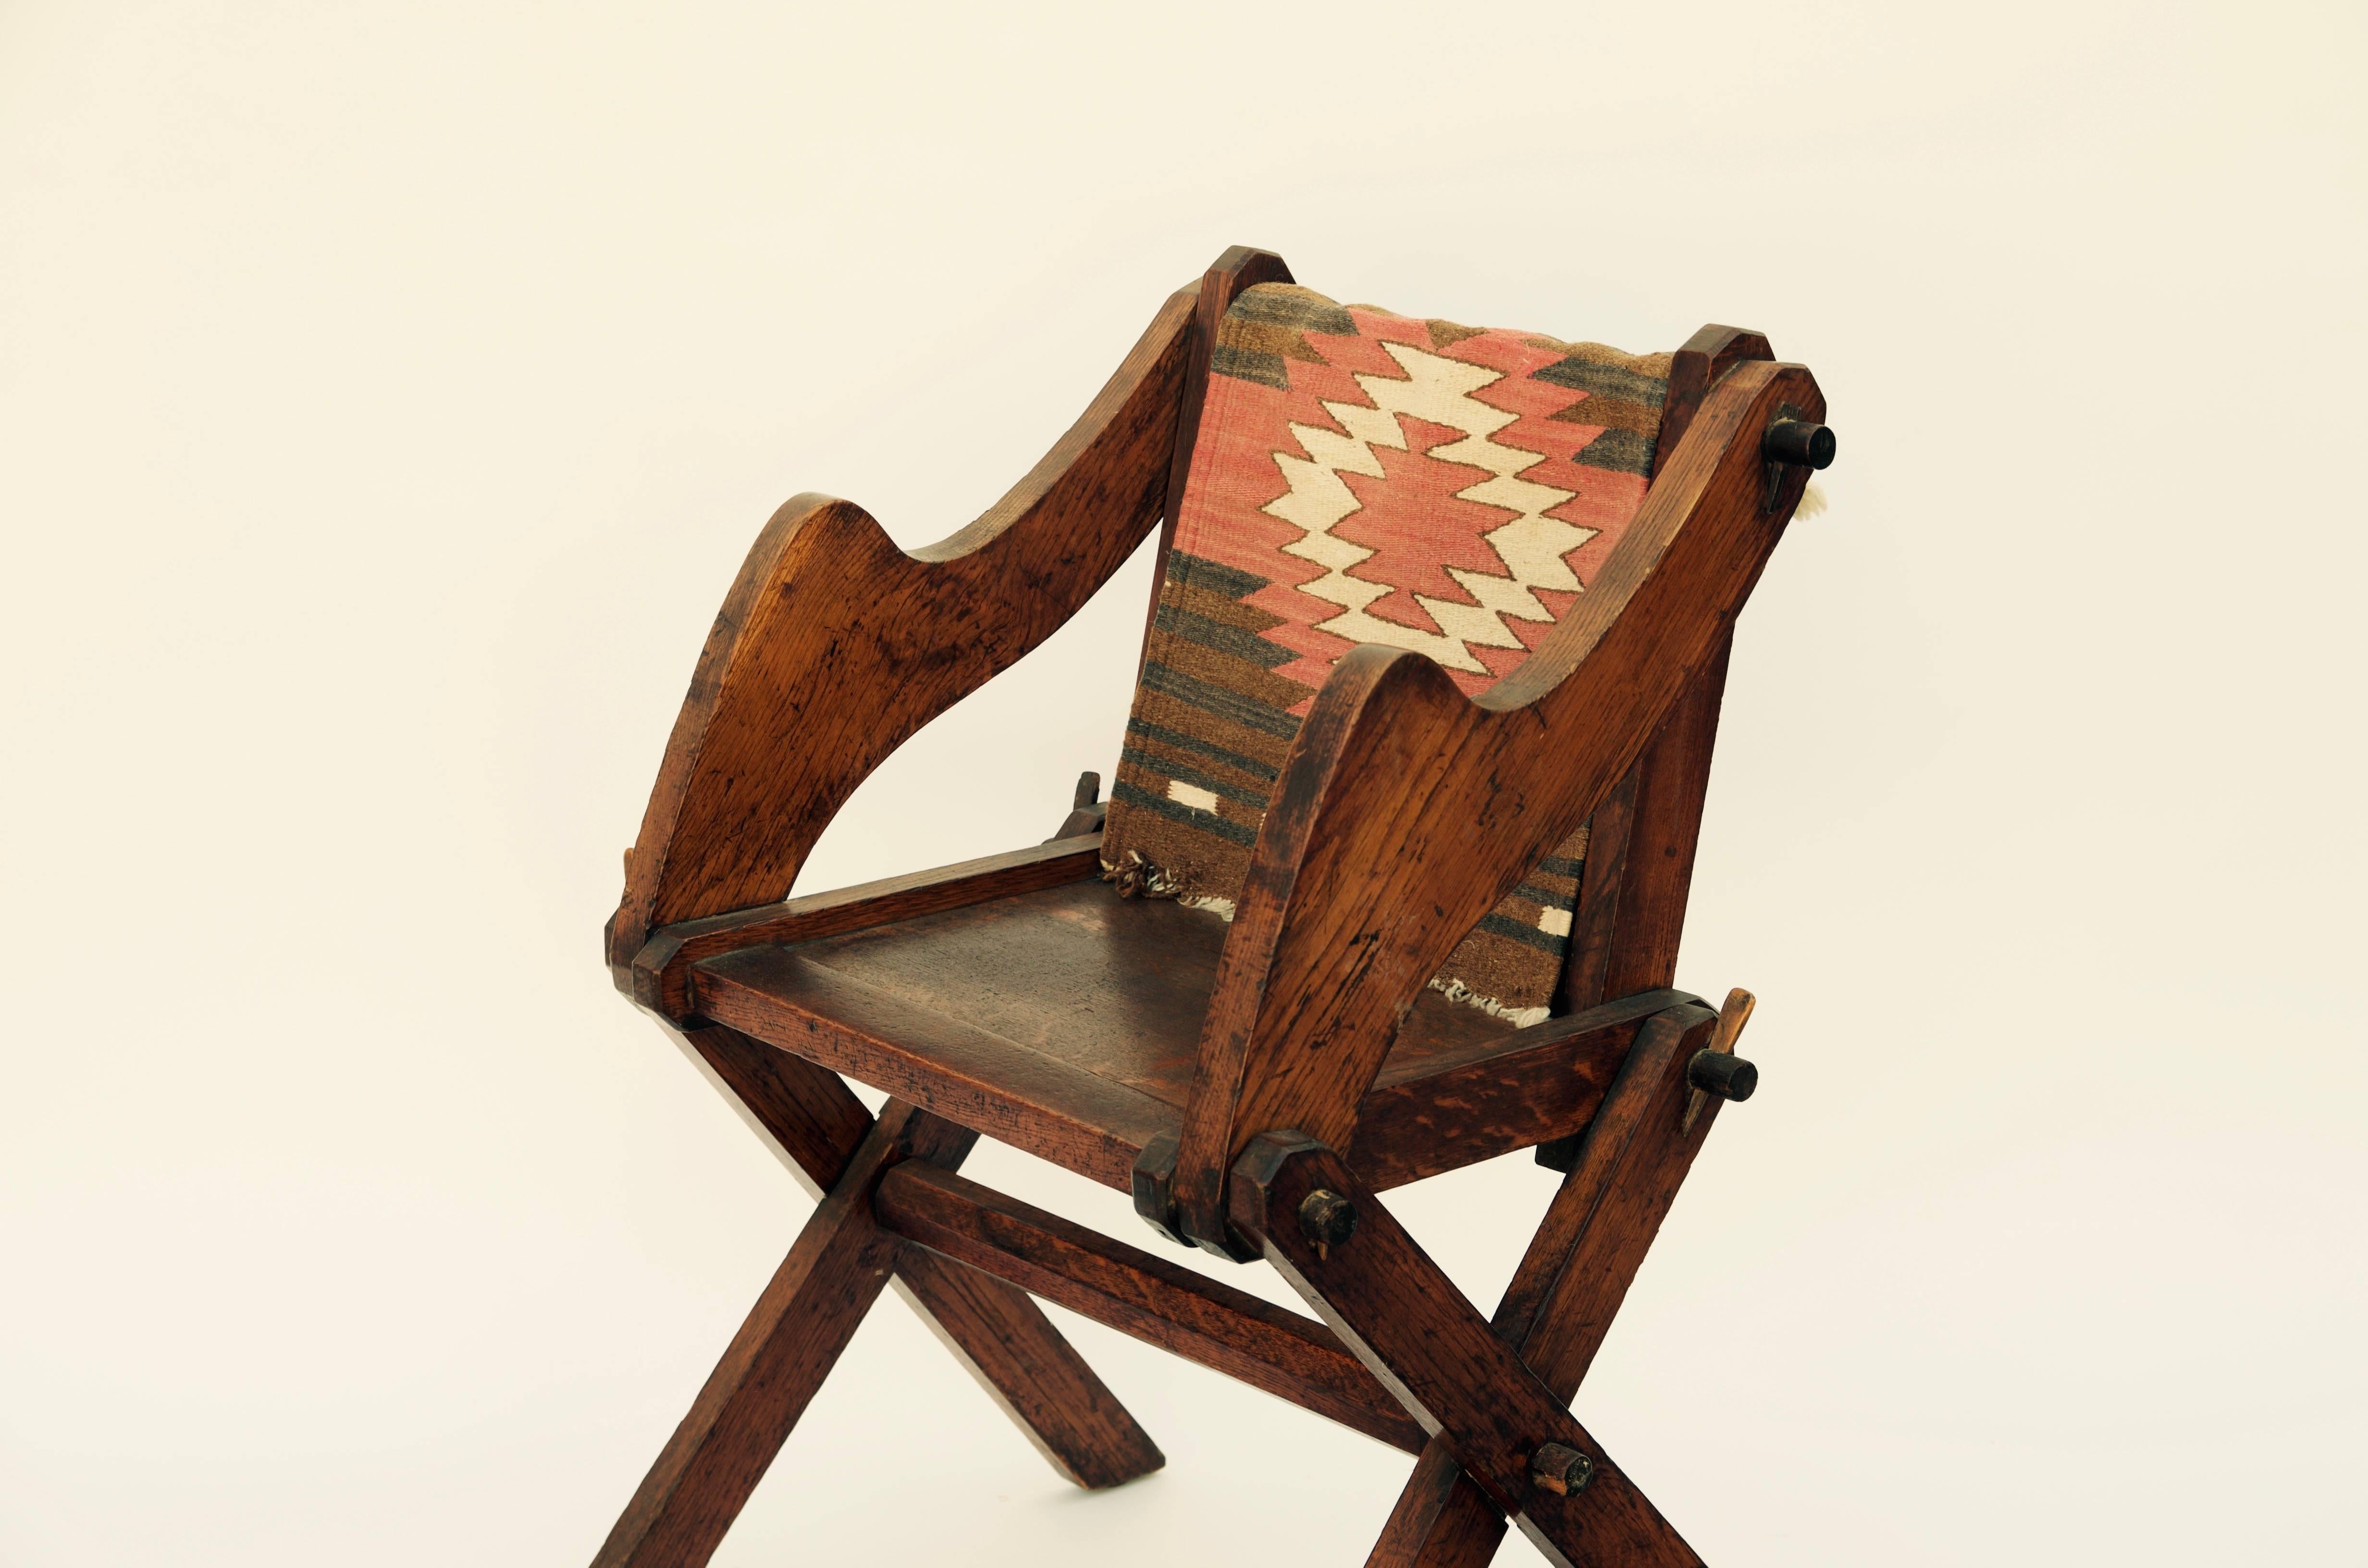 Unusual patinated oak Arts & Crafts Glastonbury Chair side chair with vintage Navajo fabric. Beautifully crafted, late 19th Century.